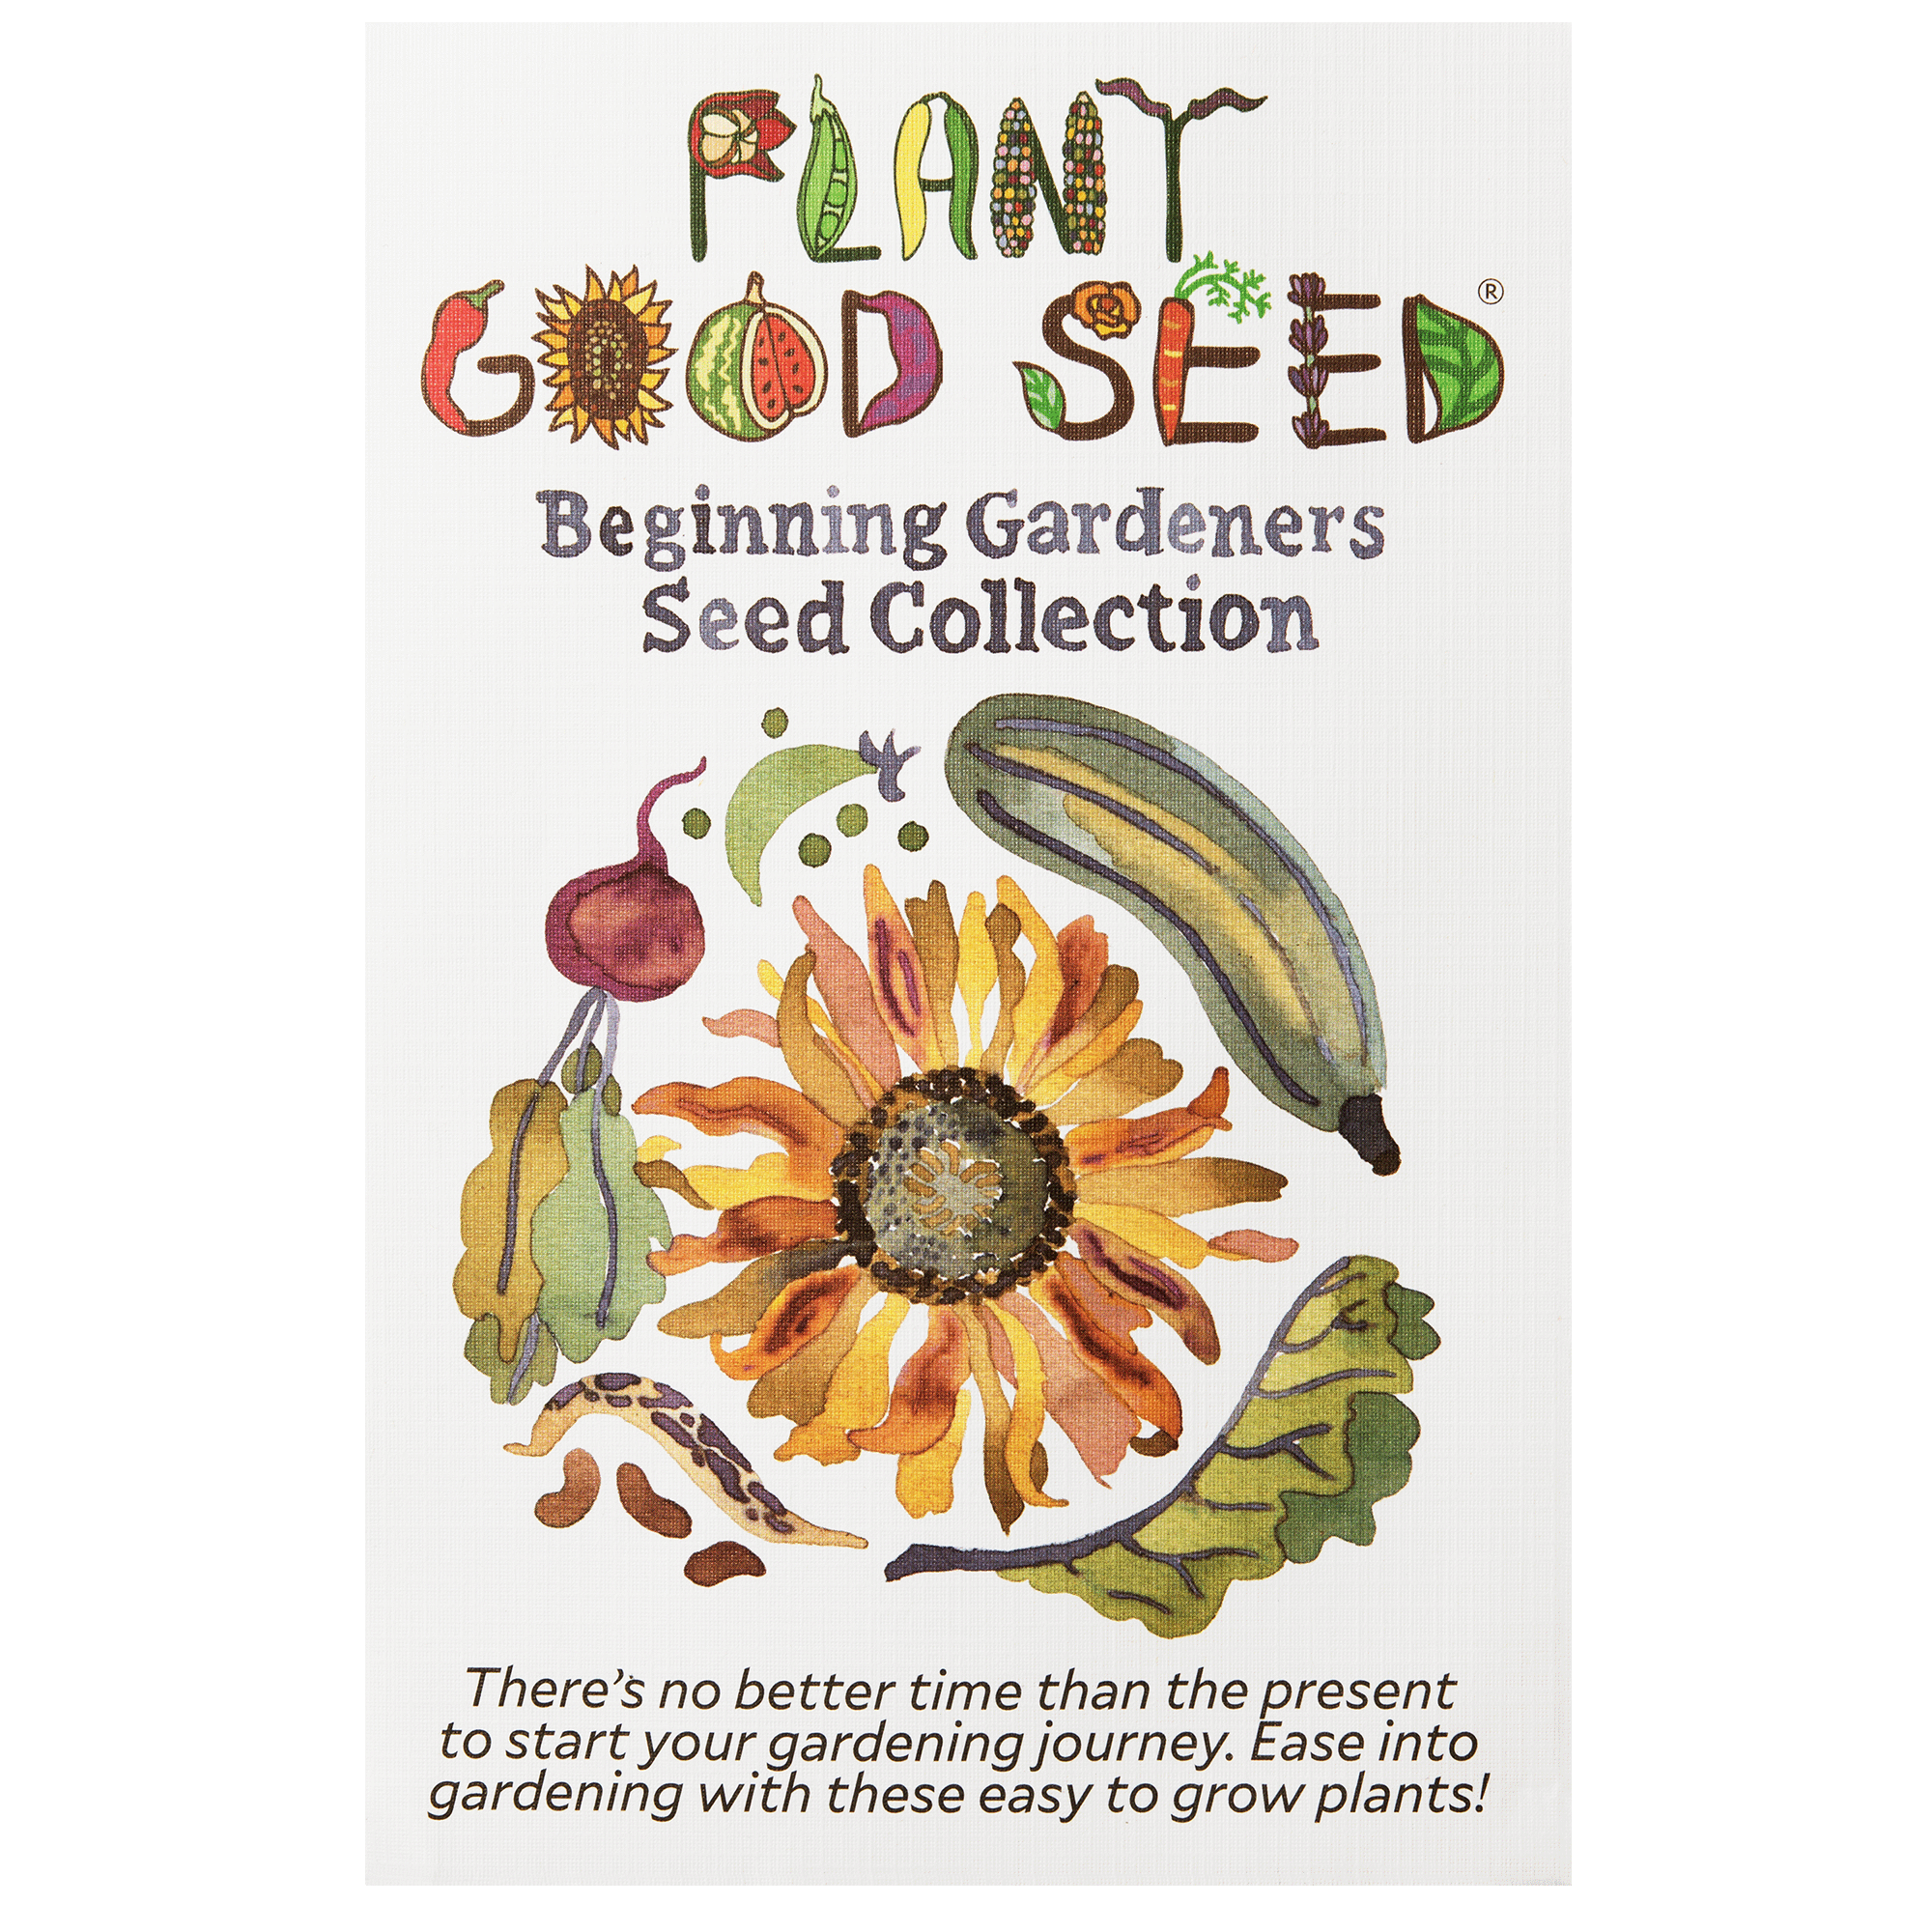 Beginning Gardeners Seed Collection